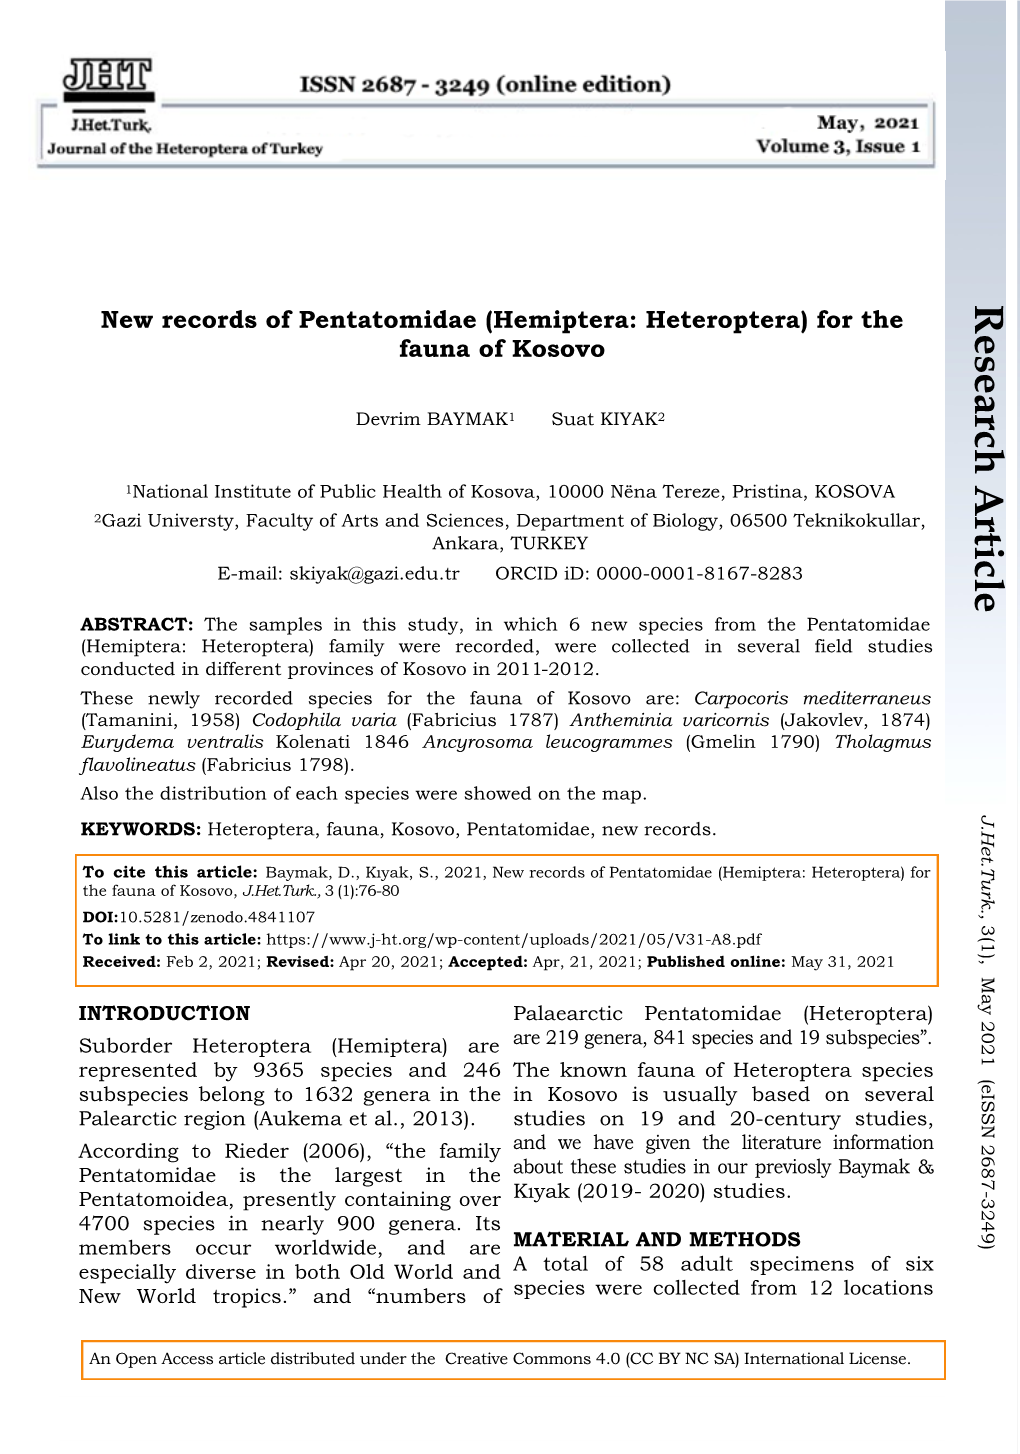 Research Article New Records of Pentatomidae (Hemiptera: Heteroptera) for the Fauna of Kosovo